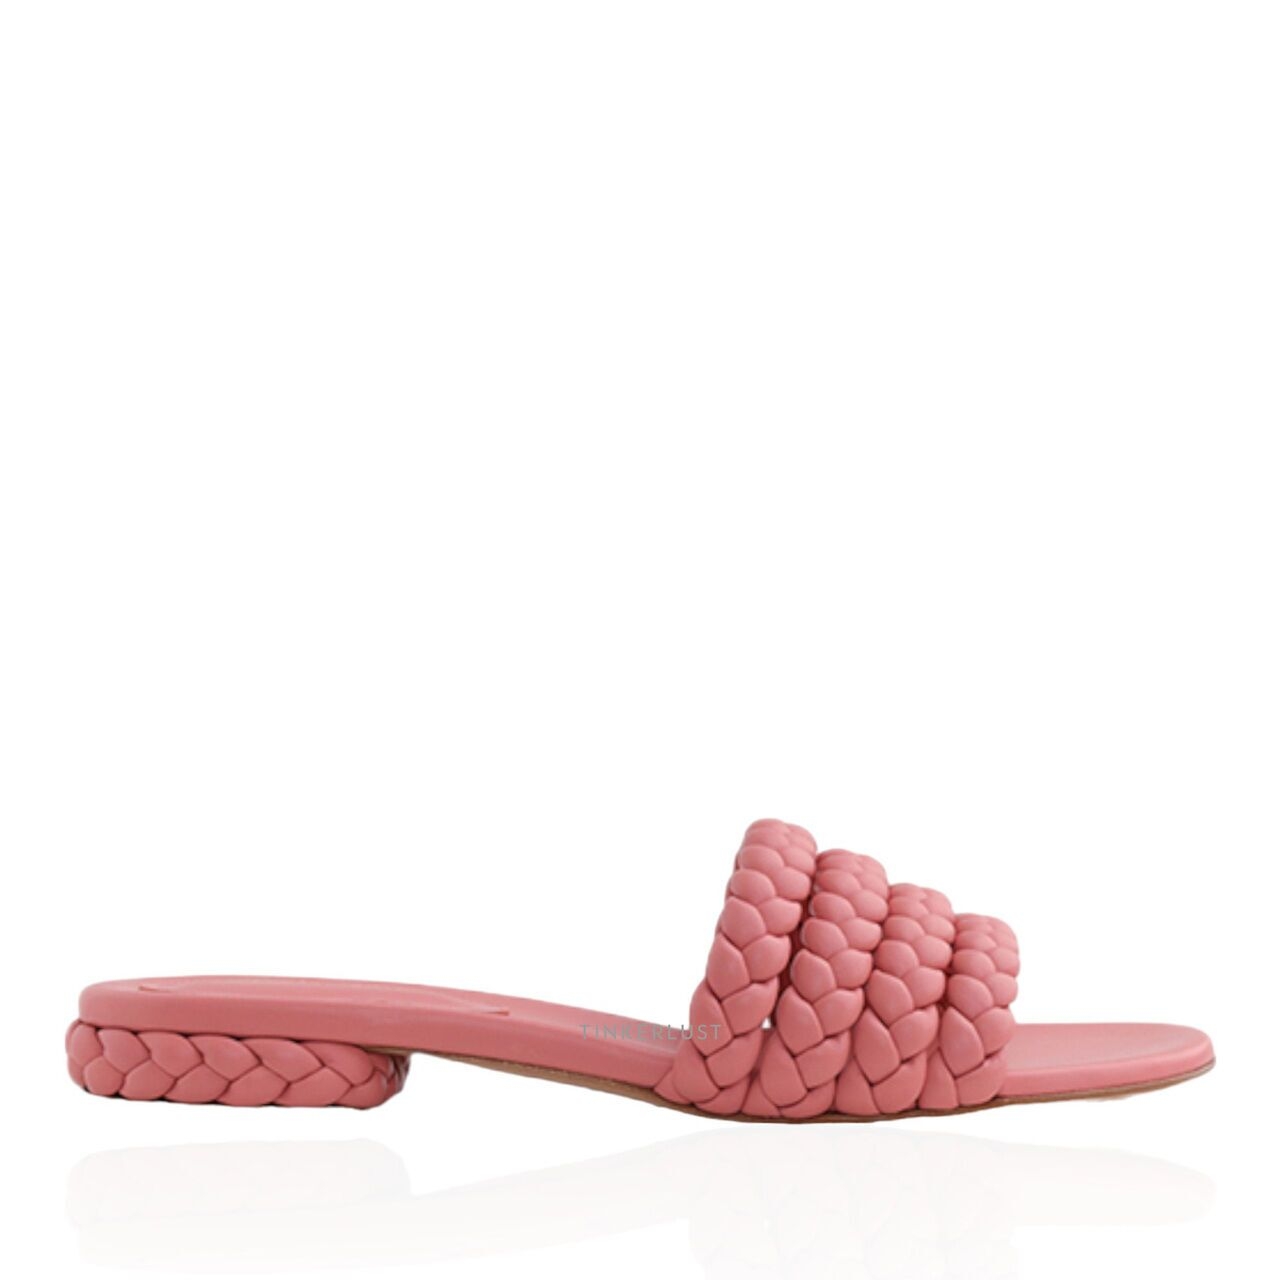 Gianvito Rossi Ischia Mules Pink Braided Nappa Leather Sandals